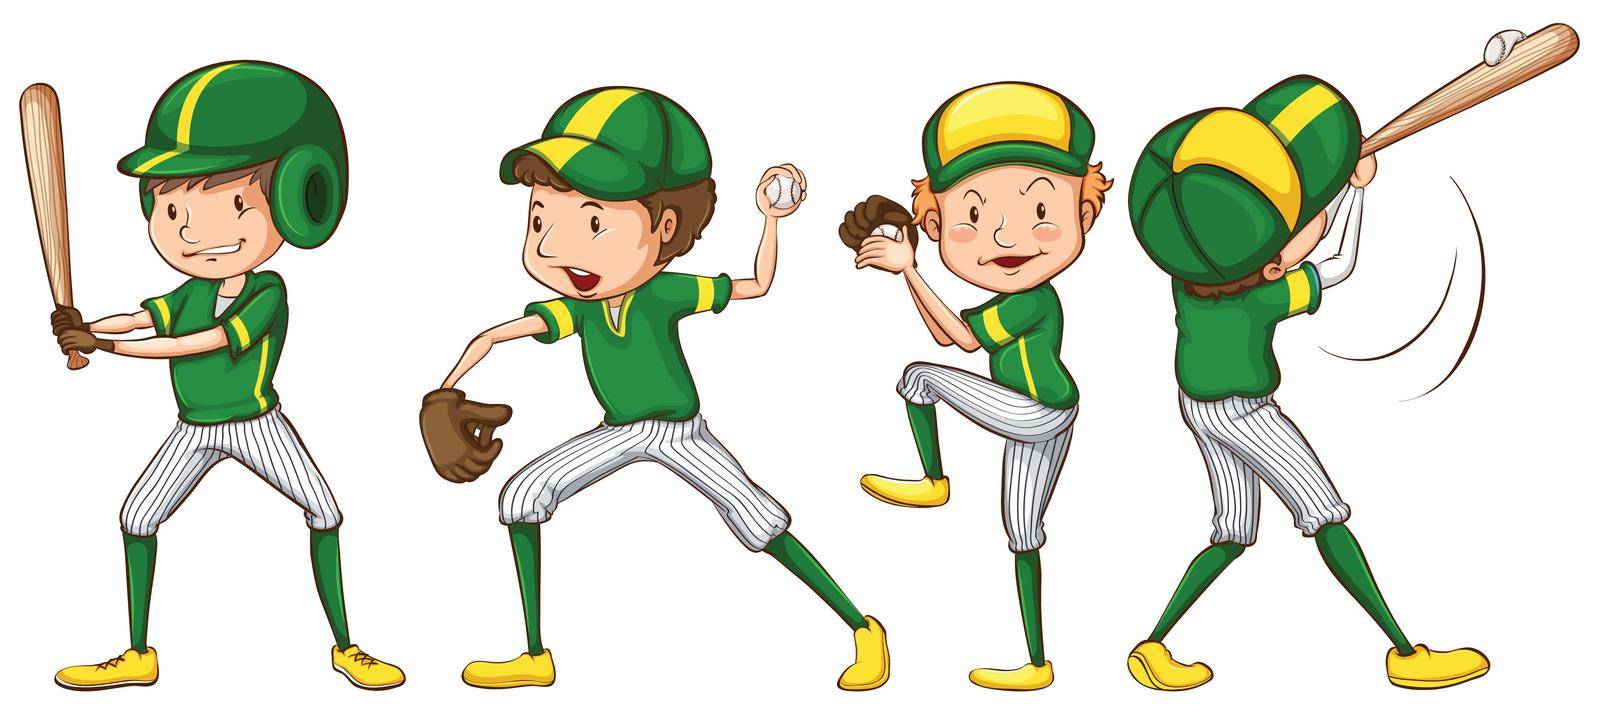 Illustration of a coloured sketch of the baseball players in green uniform on a white background